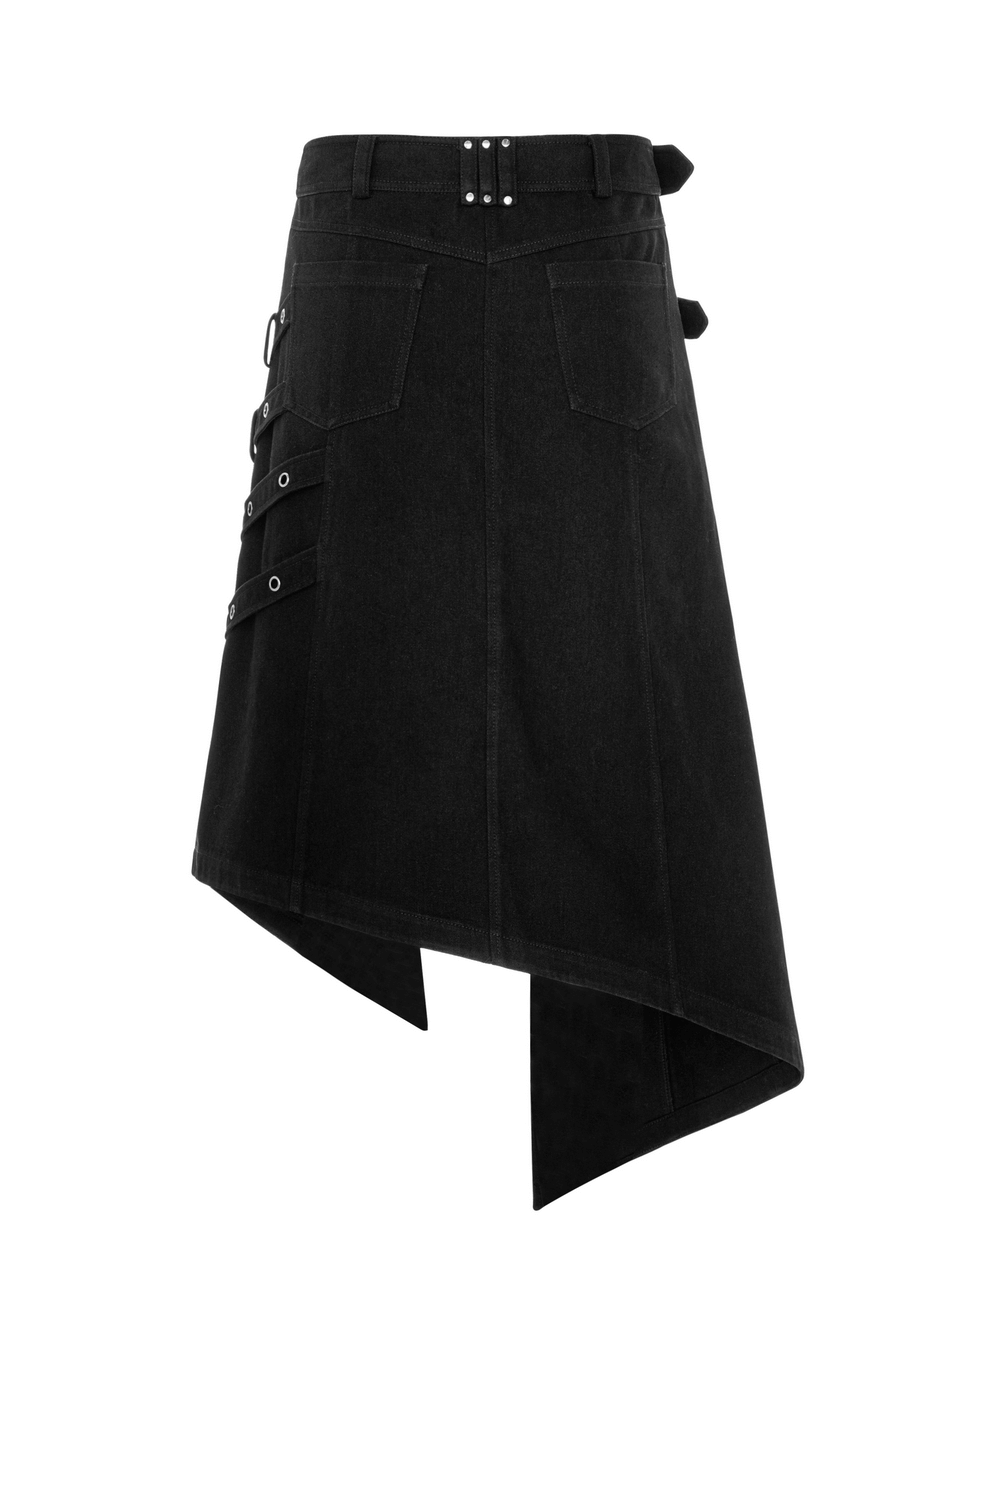 Edgy Punk Asymmetric Overskirt with Snake Buckle